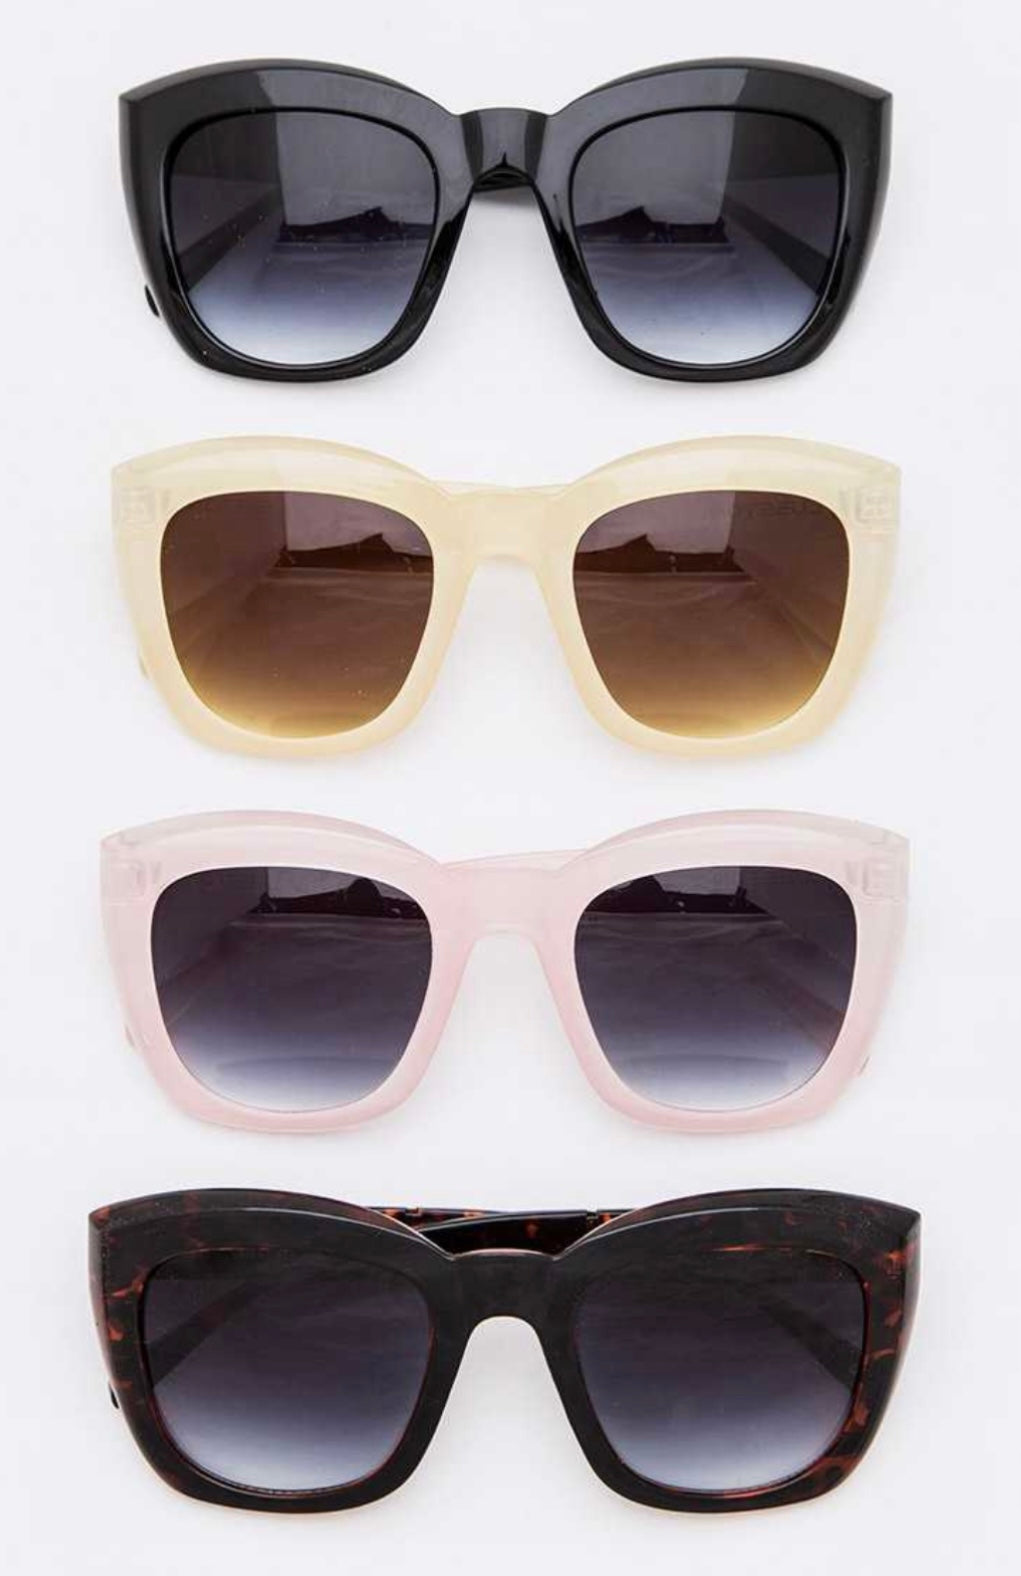 Sweet Classic Square Sunglasses- More Styles Available!